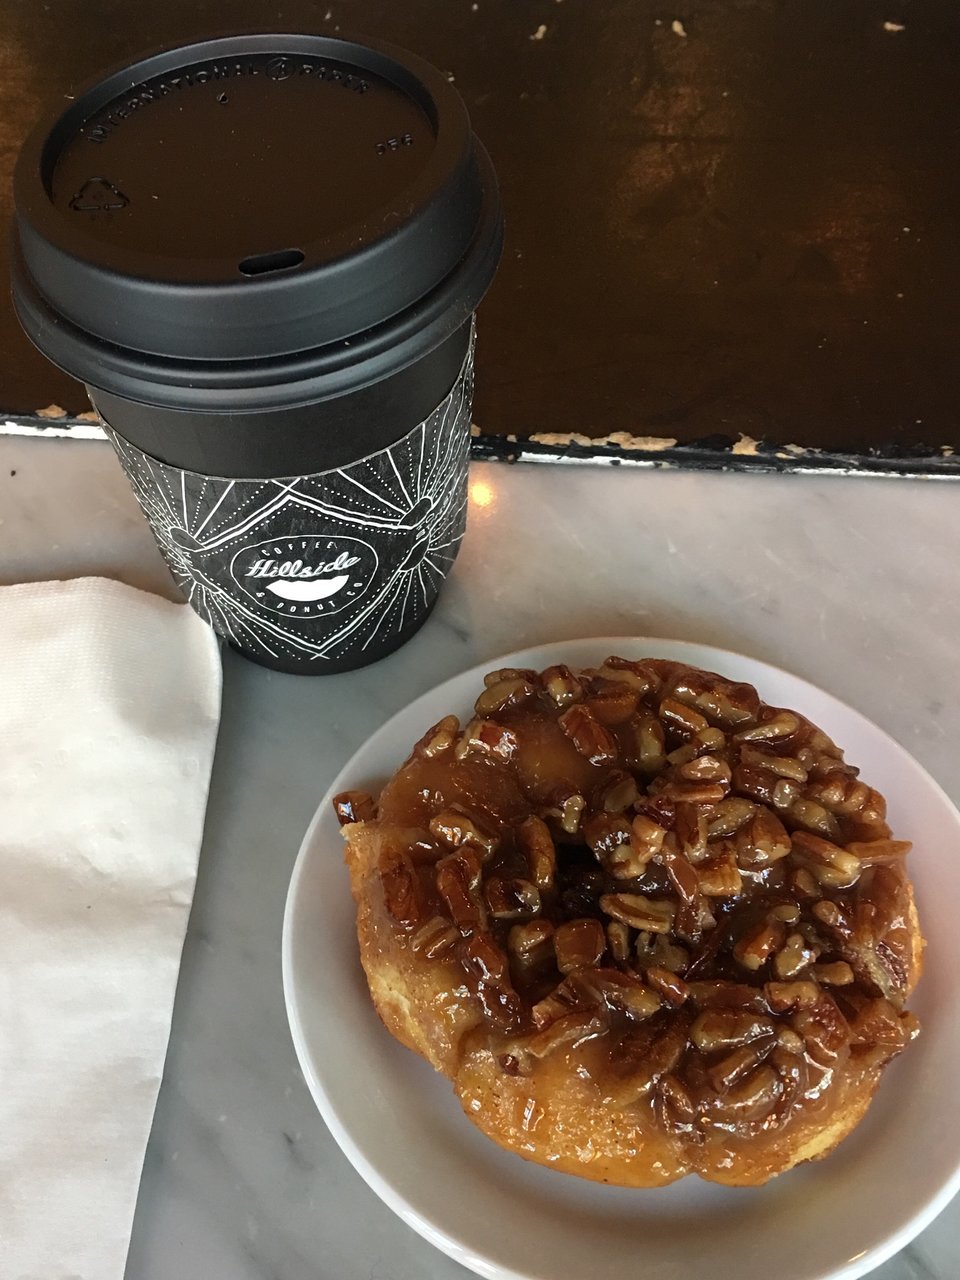 Hillside Coffee and Donut Co